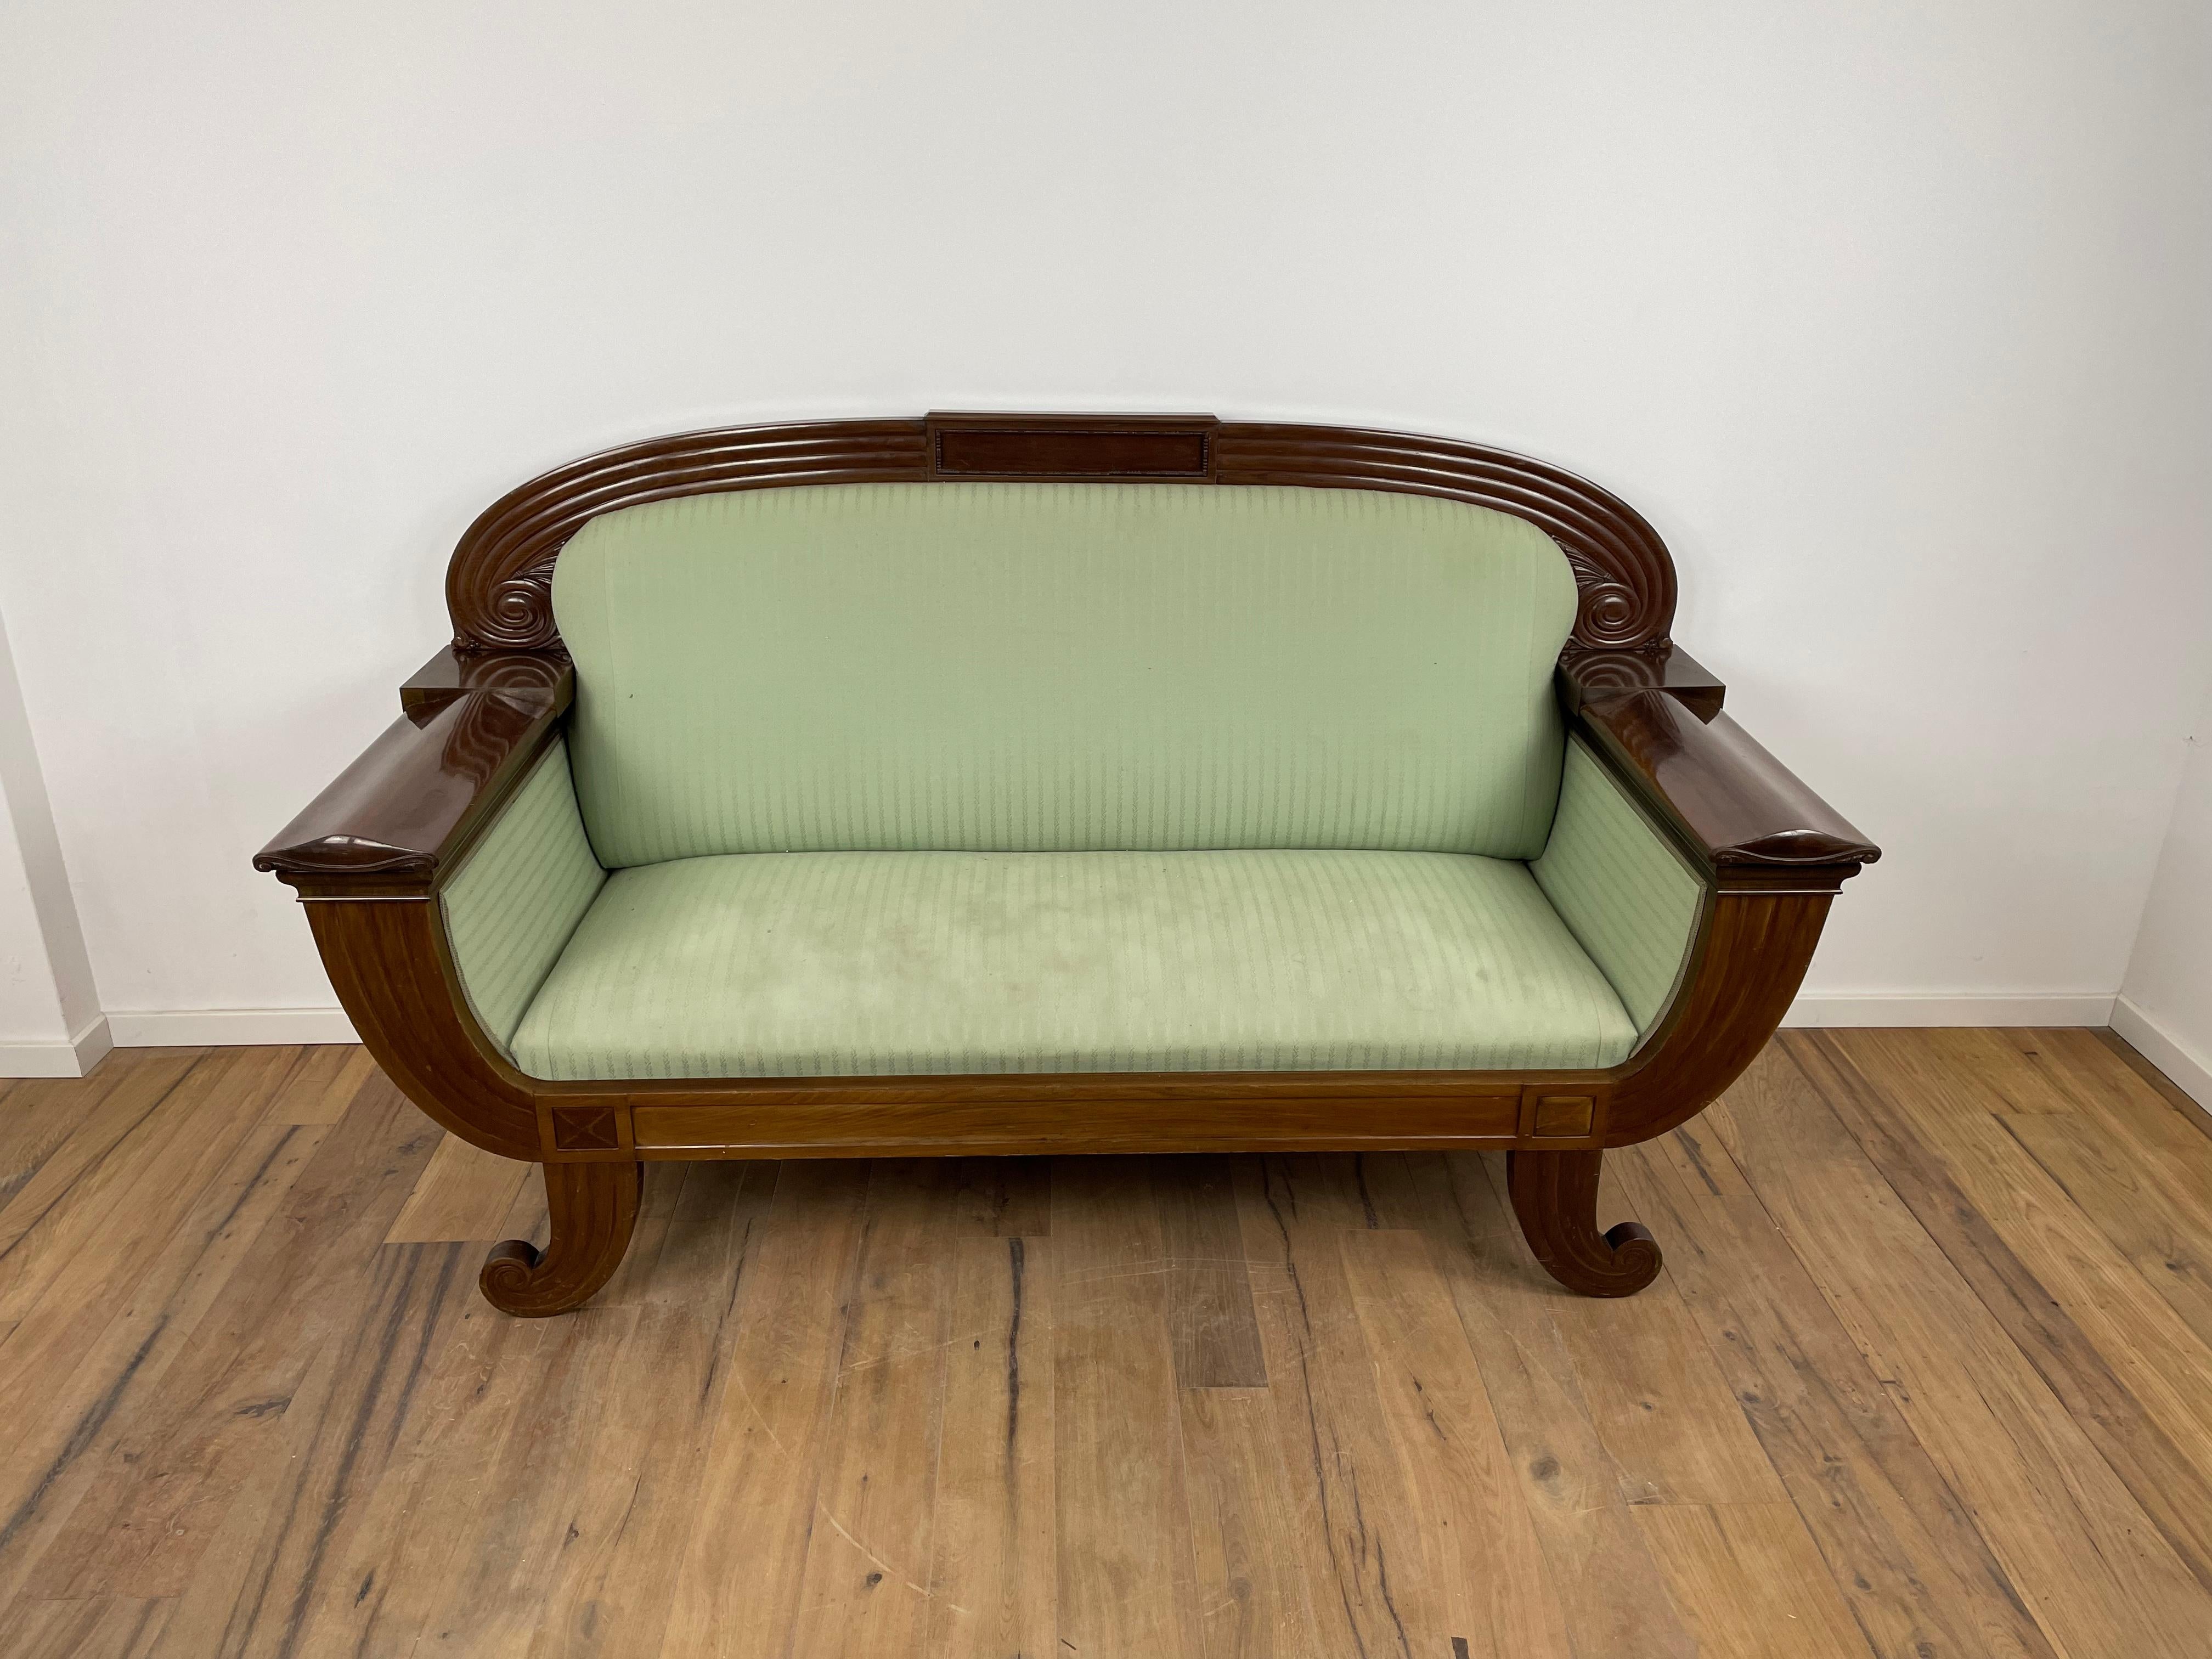 Stunning sofa by Georg Kofoed from Denmark. This sofa is in very good original condition - the fabric and finish are original and in fantastic condition given its age. A piece of design history from Denmark by a great designer / manufacturer. The